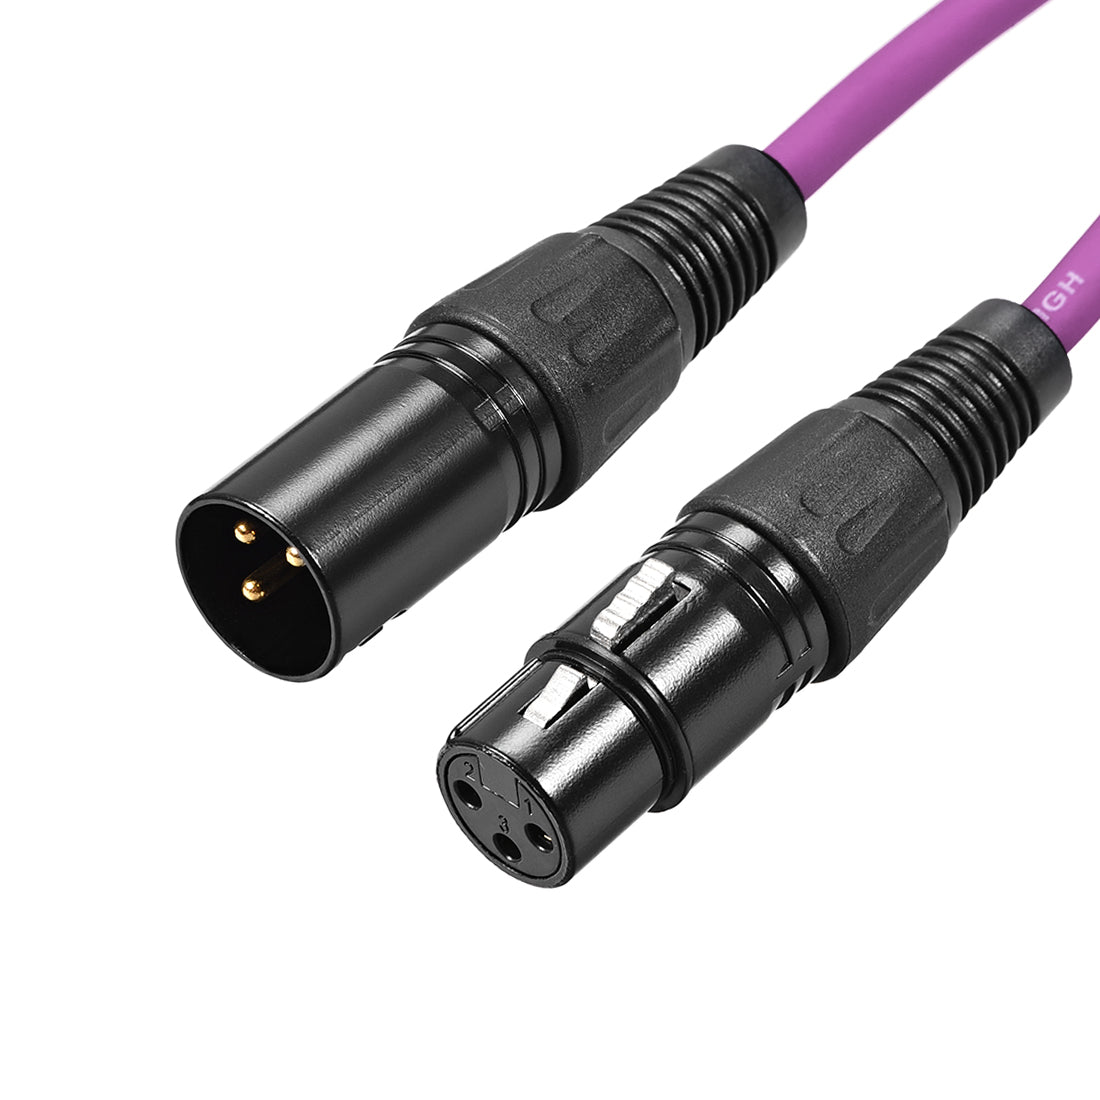 uxcell Uxcell XLR Male to XLR Female Cable Line for Microphone Video Camera Sound Card Mixer Black XLR Purple Line 2M  6.56ft